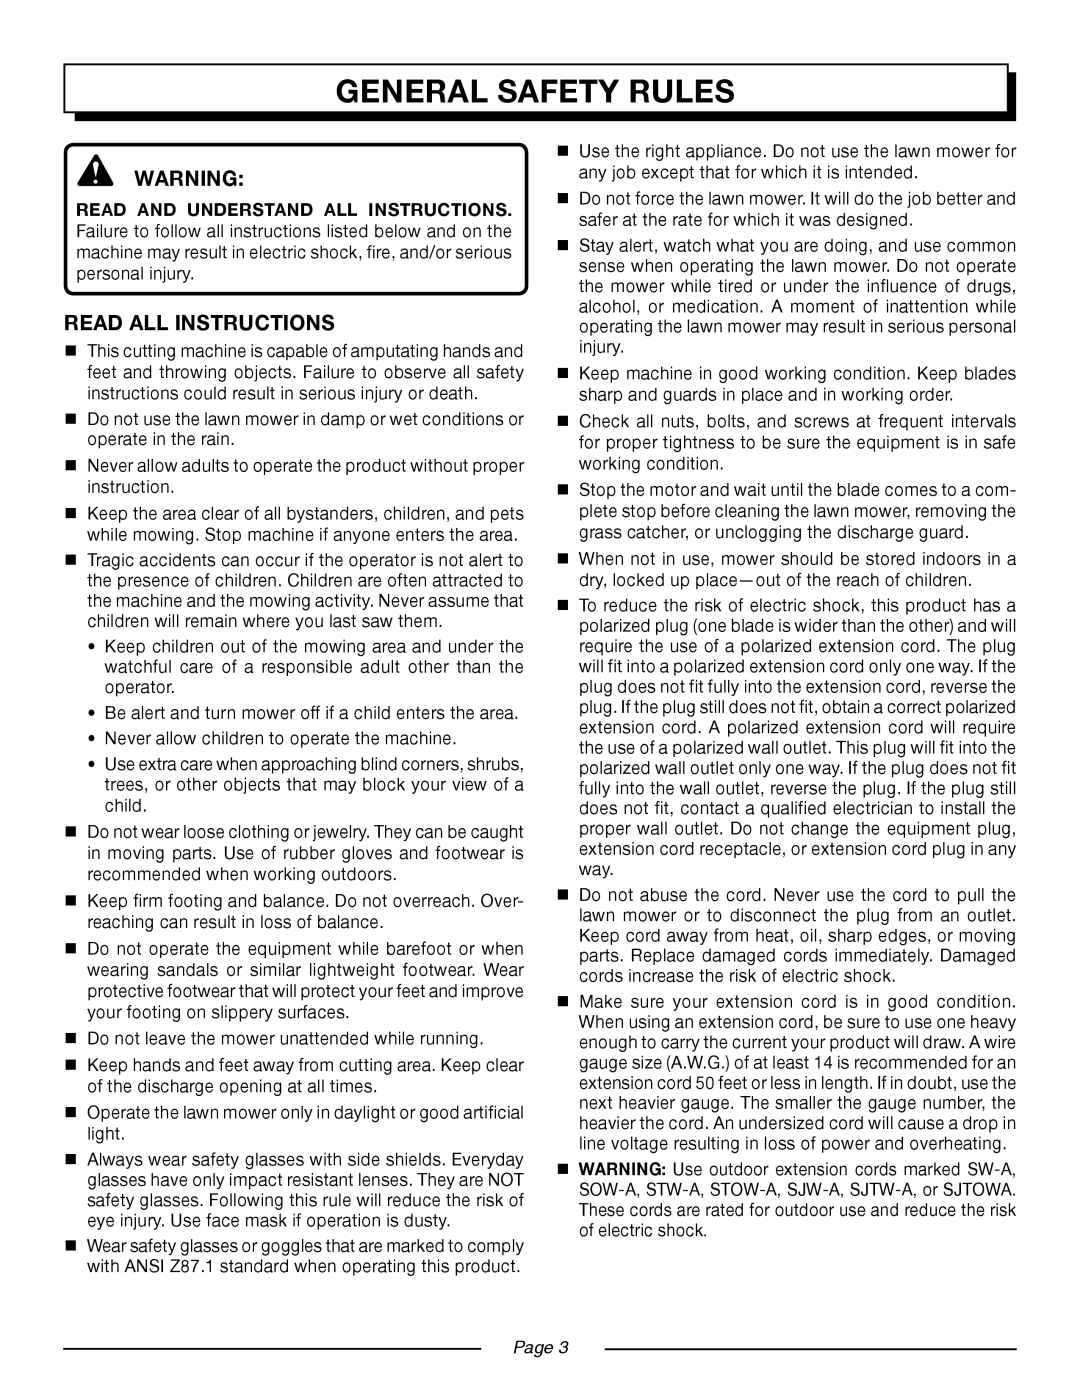 Homelite UT13220, UT13218 manual General Safety Rules, Read All Instructions, Page 